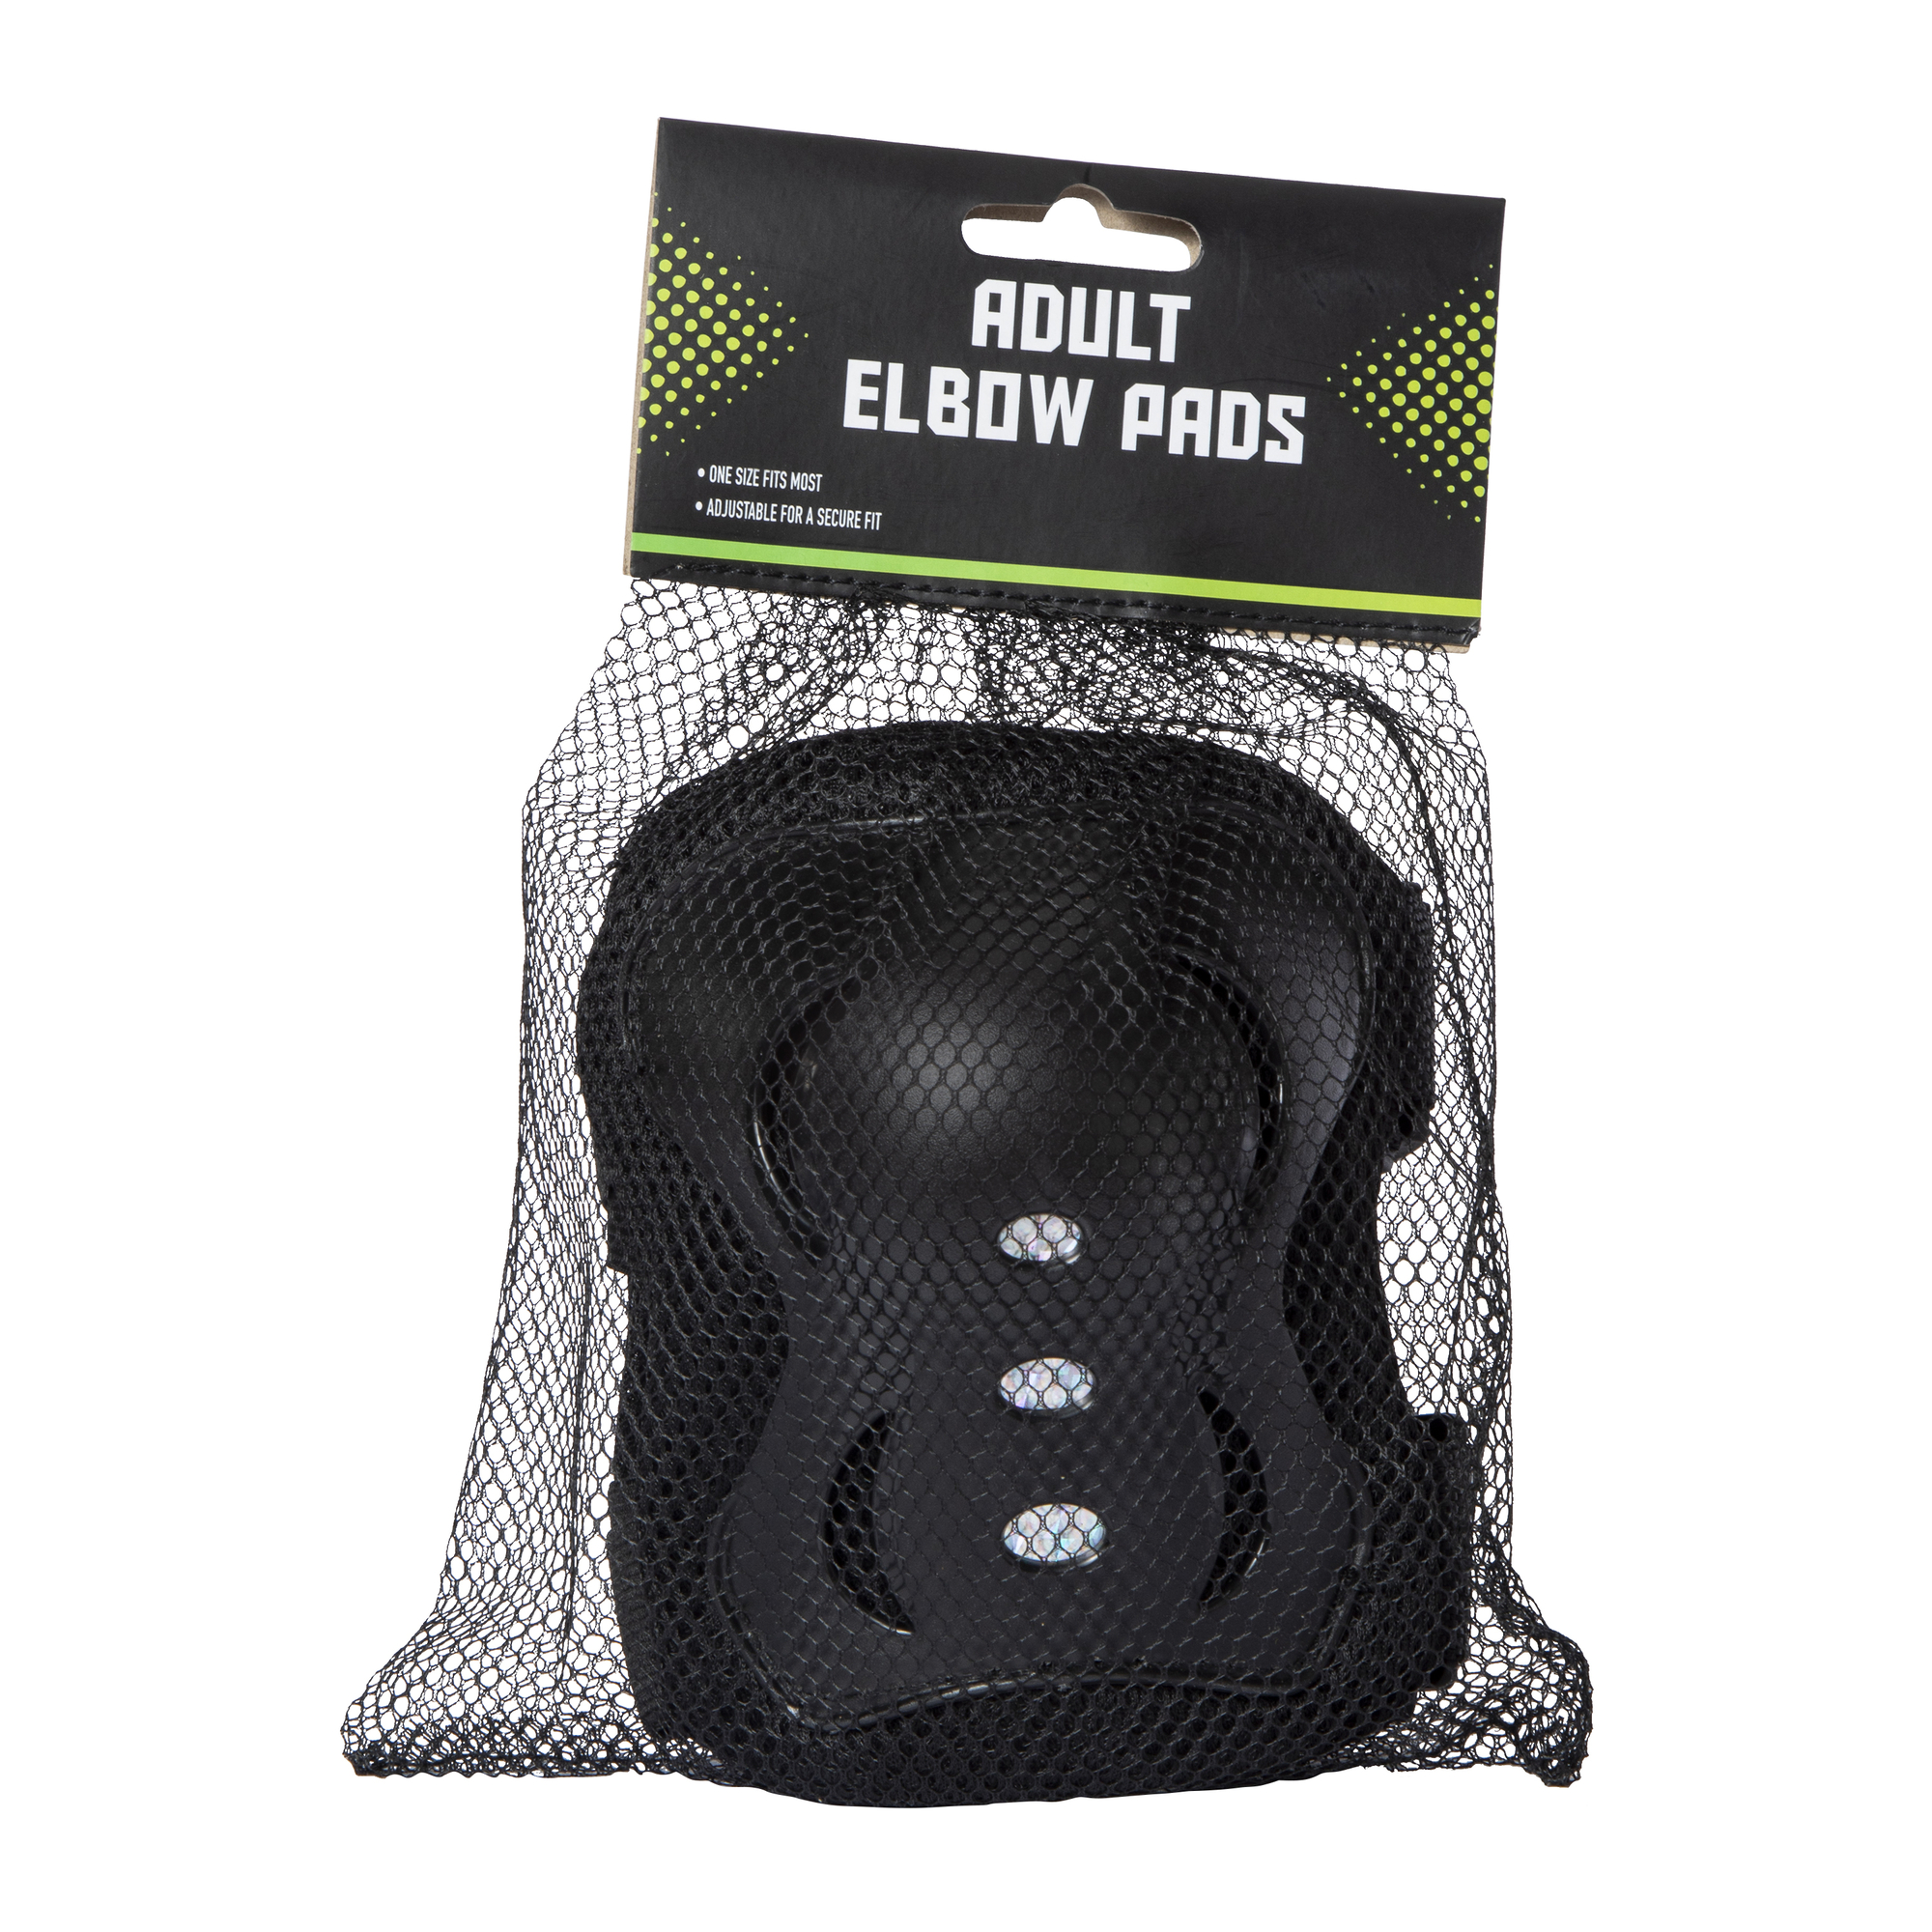 adult elbow pads 2-pack